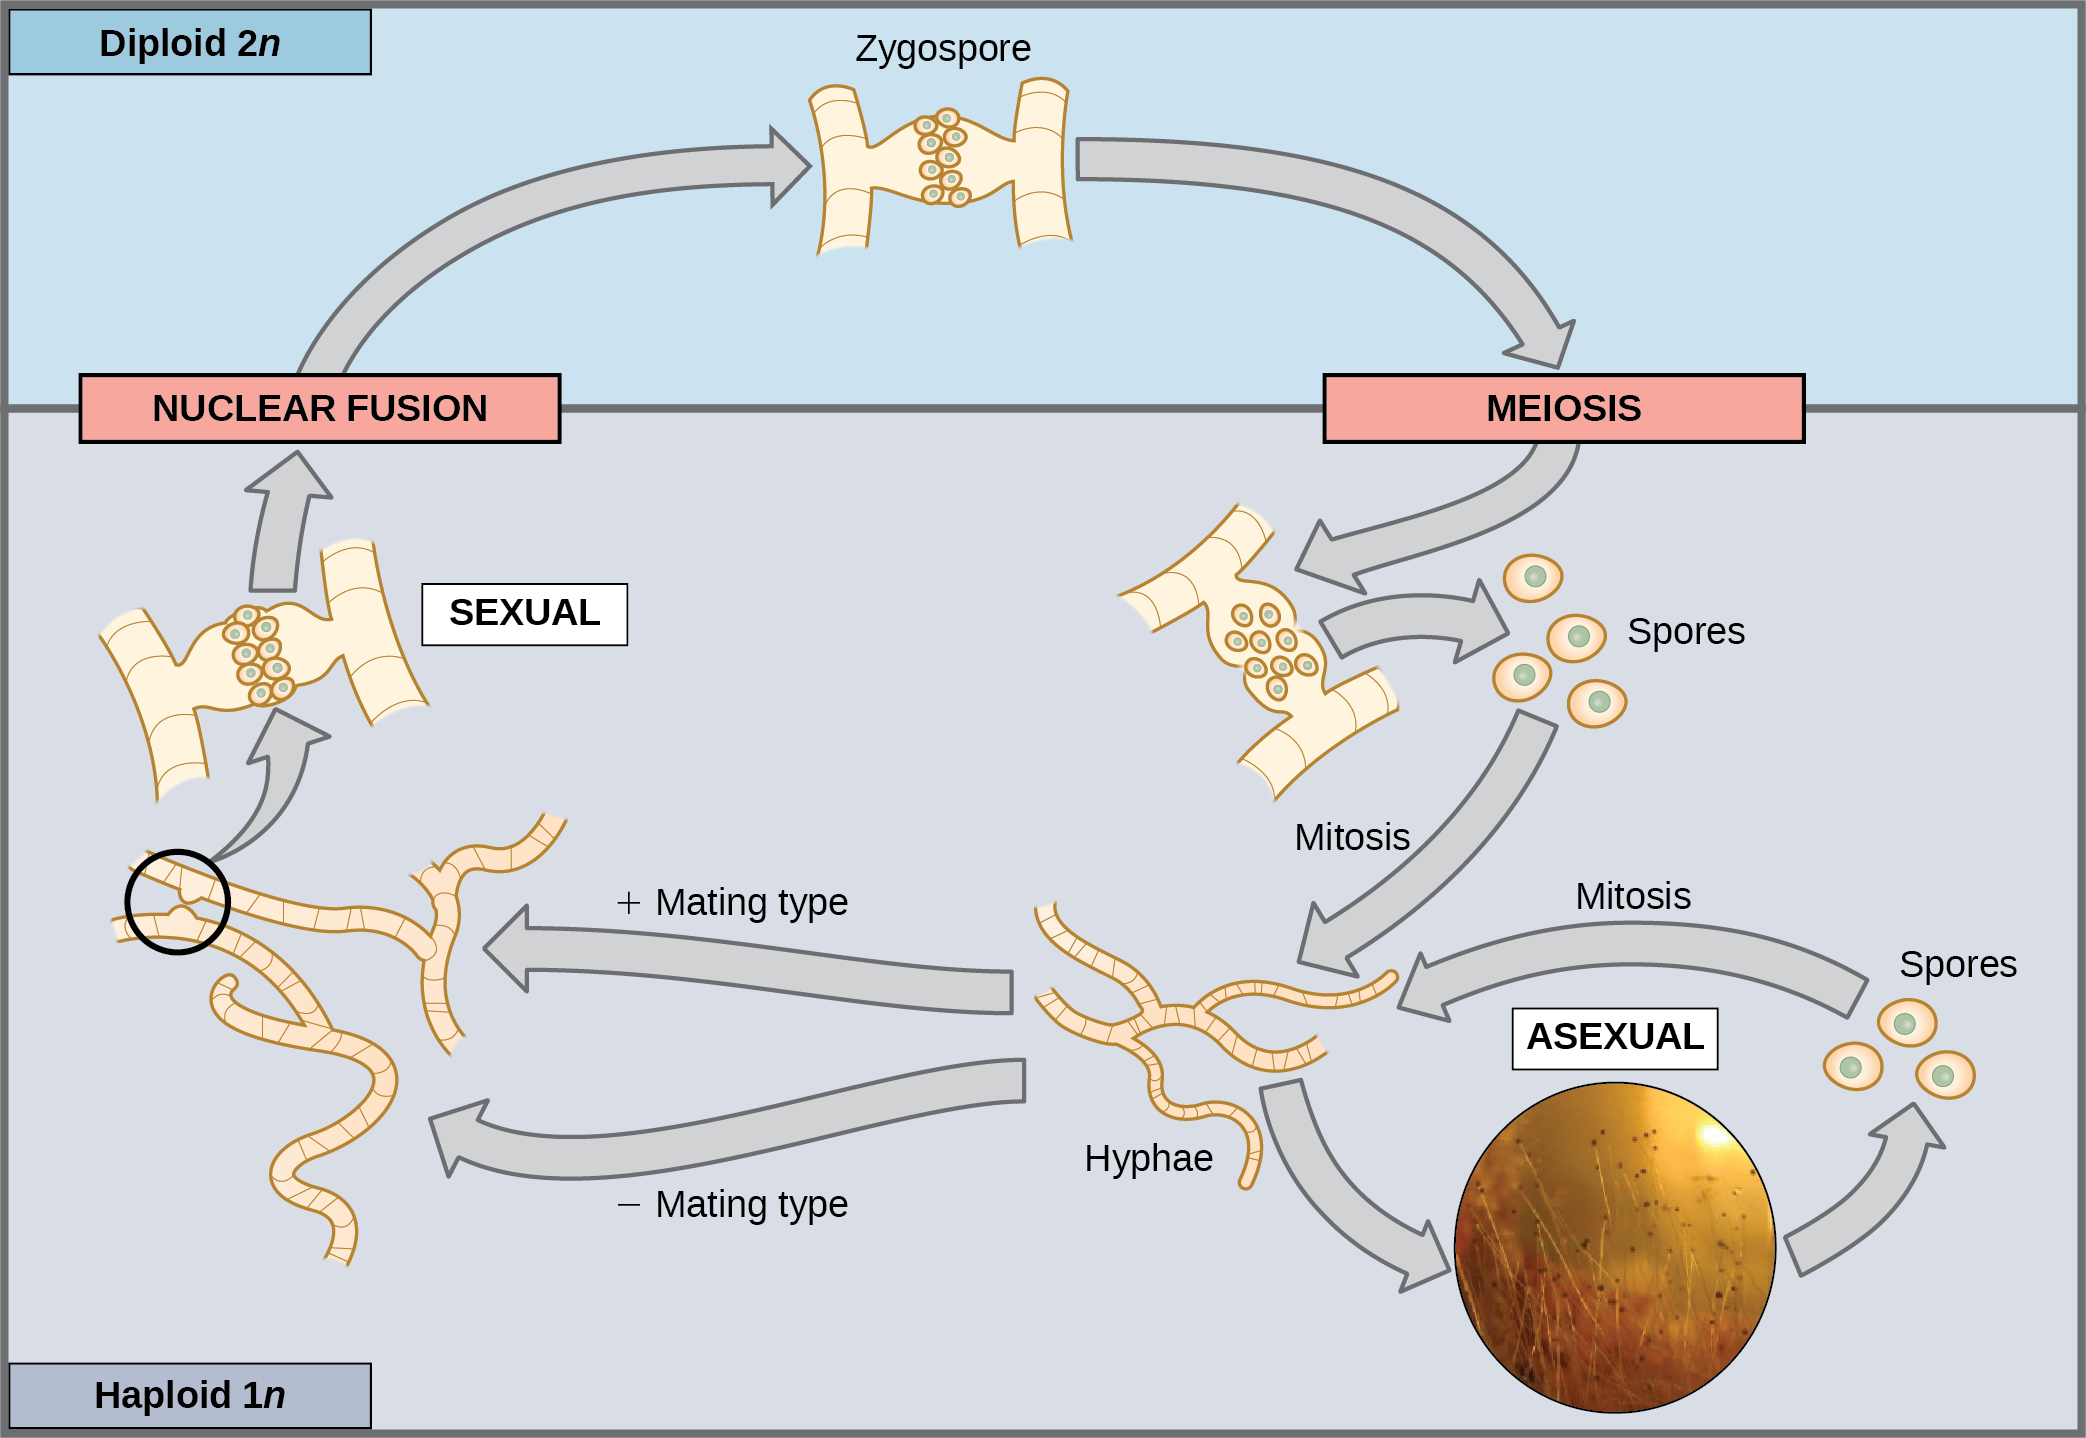 This illustration shows the life cycle of fungi. In fungi, the diploid (2n) zygospore undergoes meiosis to form haploid (1n) spores. Mitosis of the spores occurs to form hyphae. Hyphae can undergo asexual reproduction to form more spores, or they form plus and minus mating types that undergo nuclear fusion to form a zygospore.